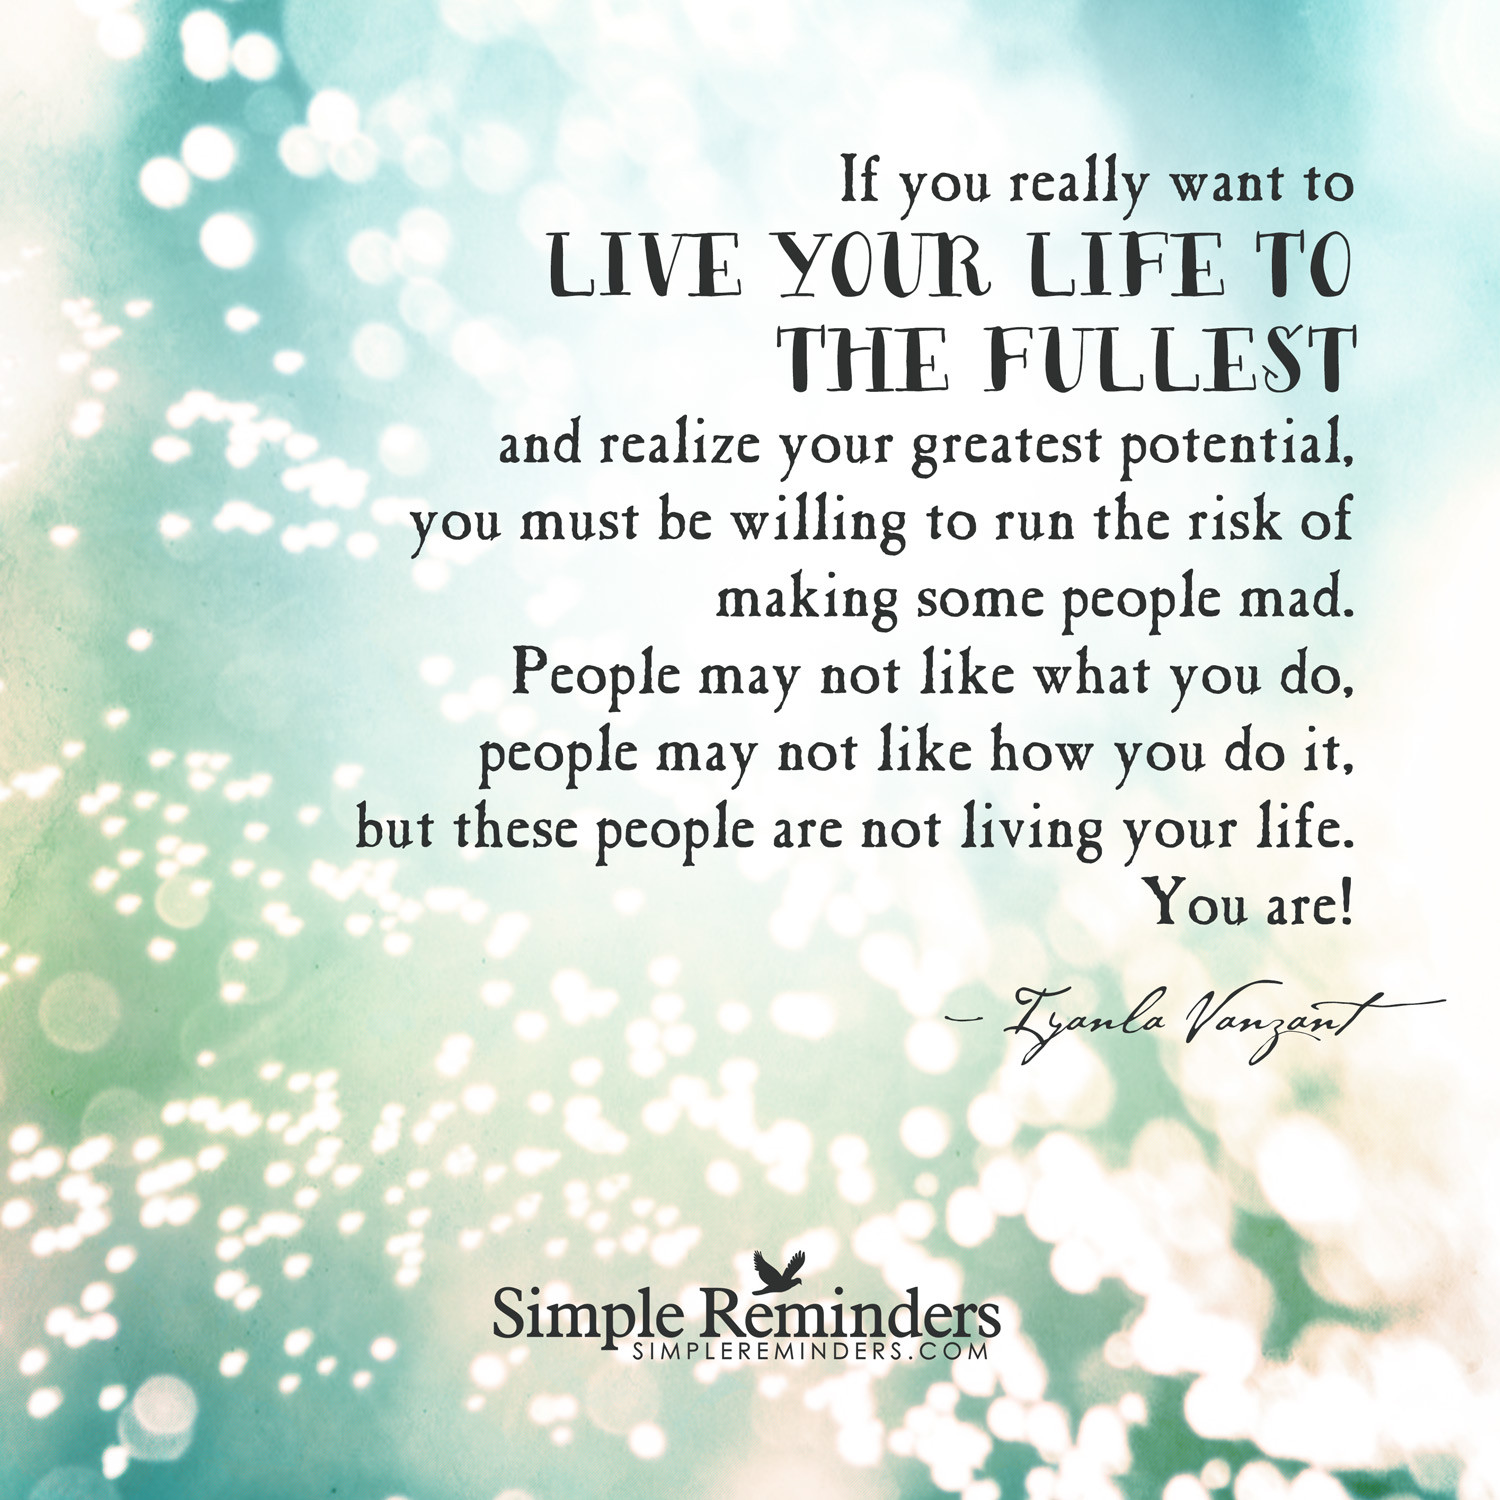 Quotes About Living Life To Its Fullest
 Simple reminders